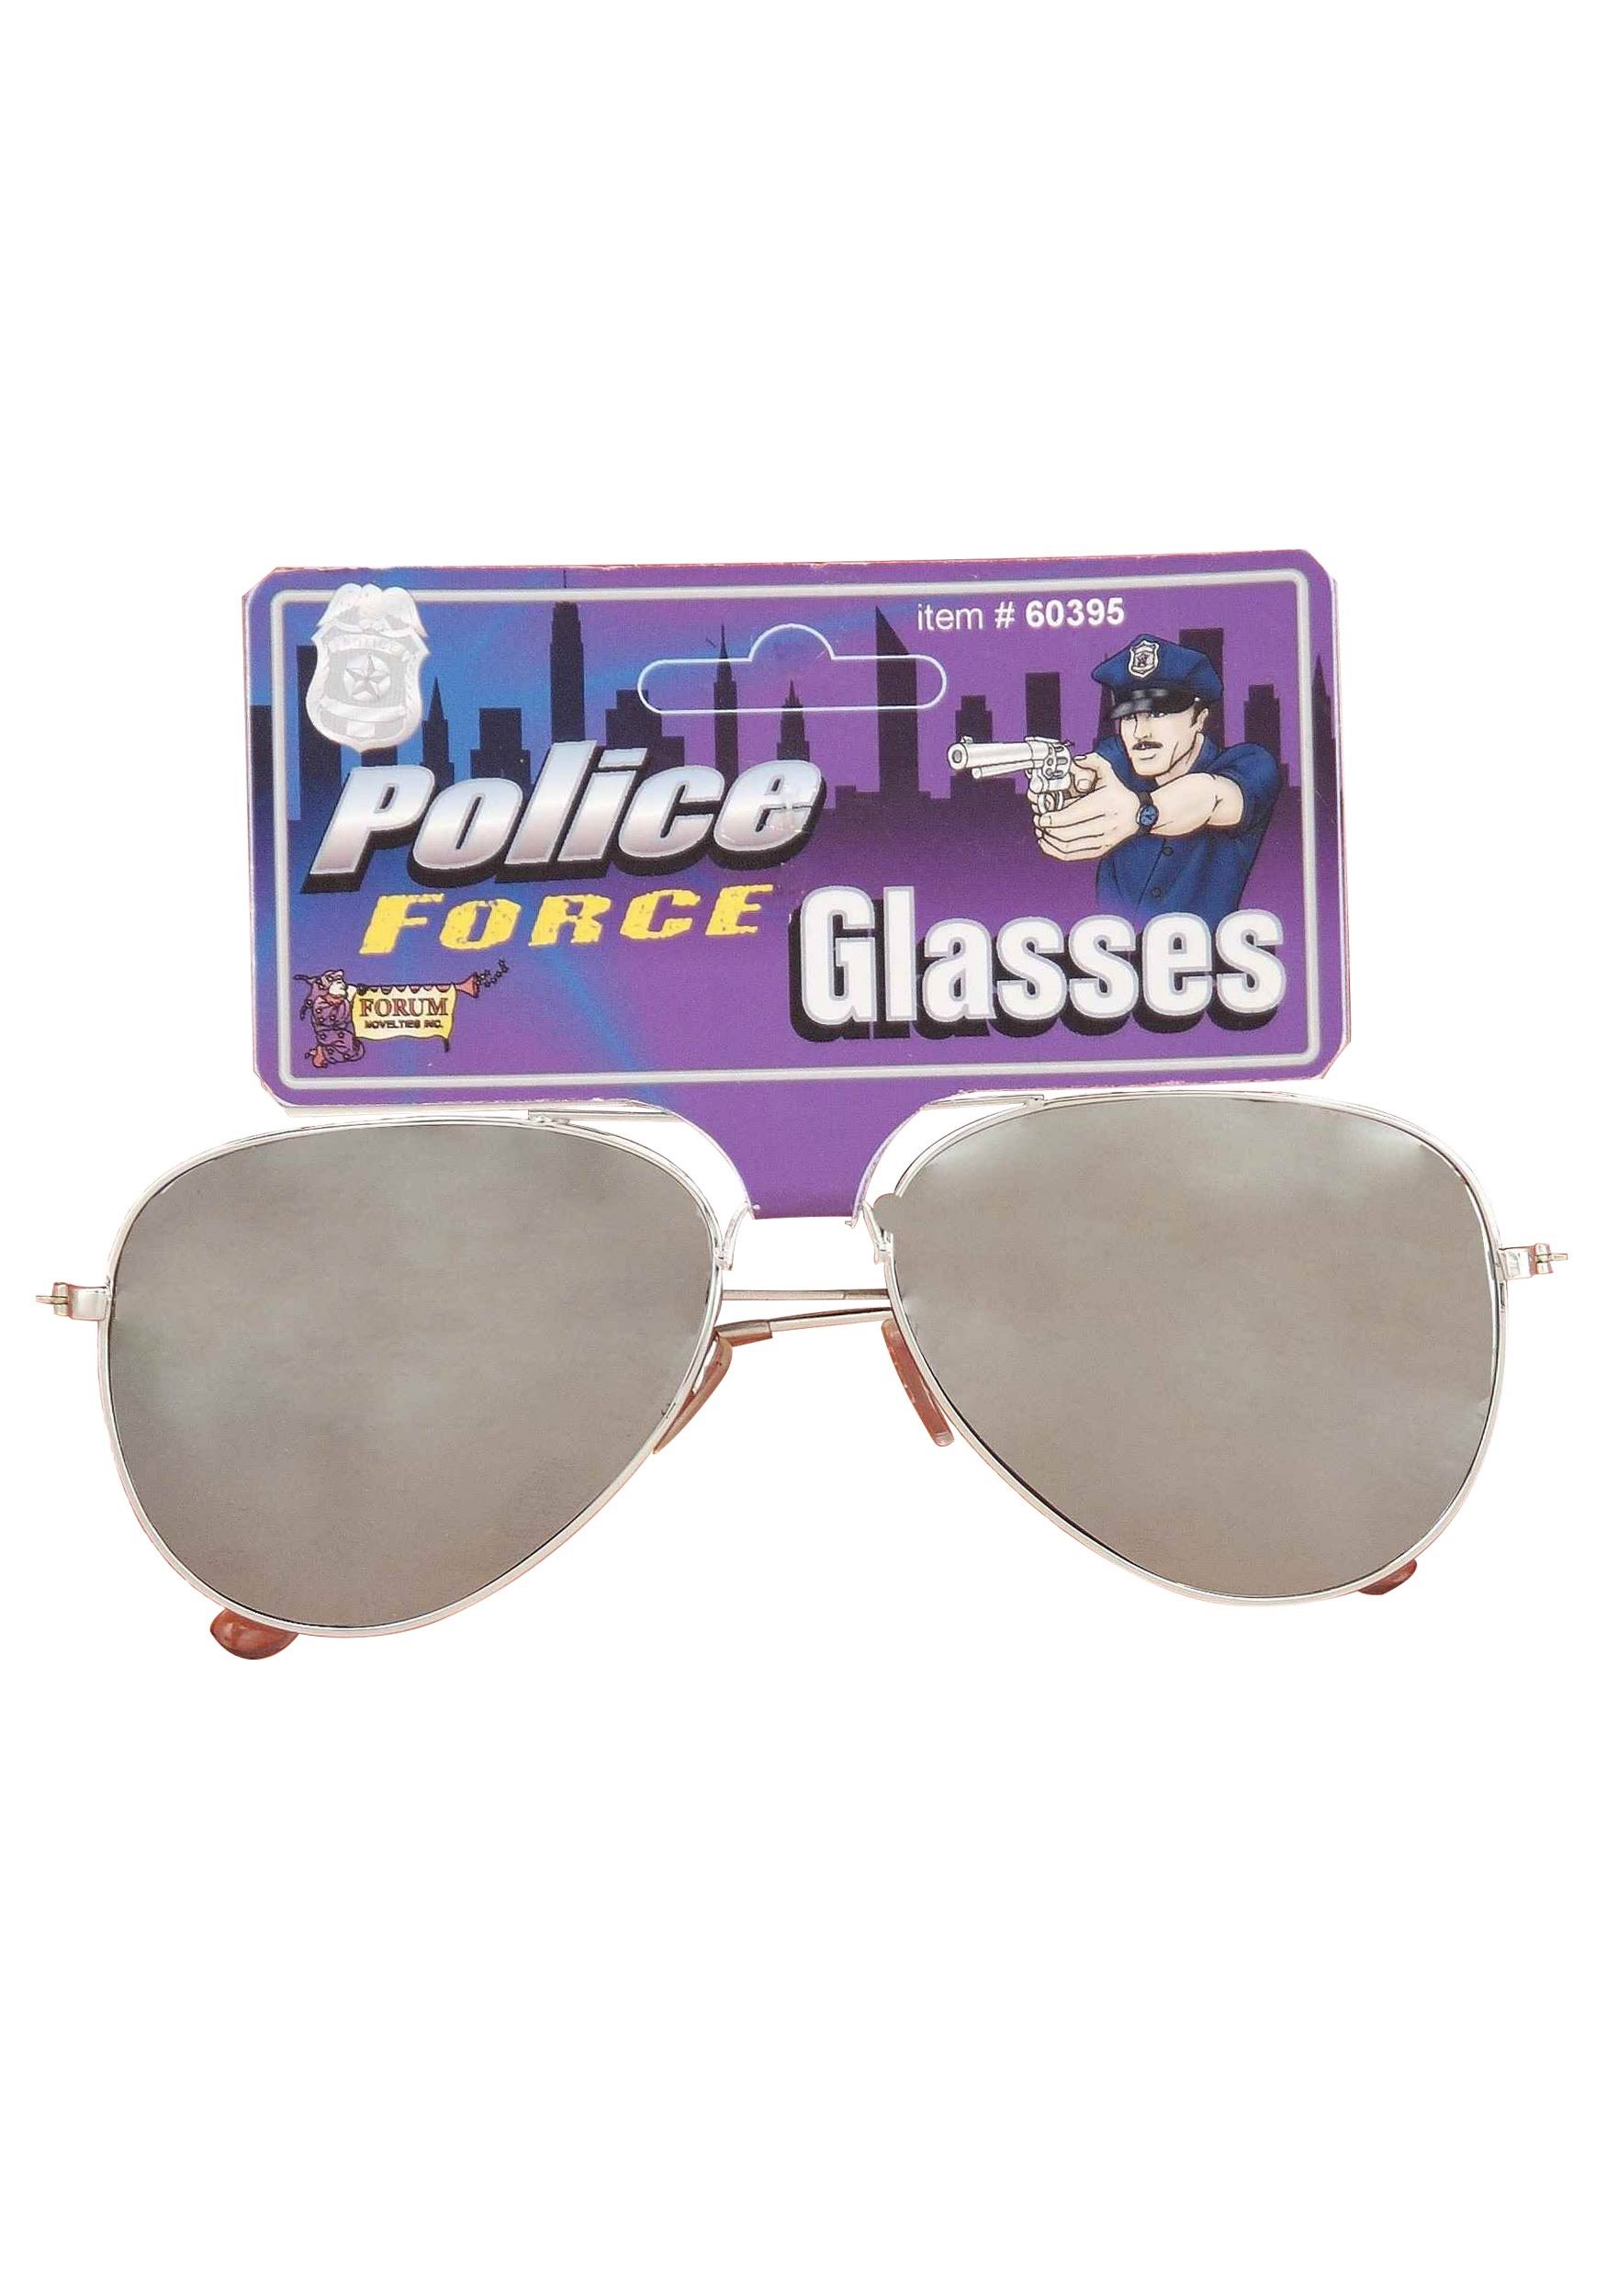 Forum Novelties Mirrored Police Glasses Costume Accessory - Silver, One Size